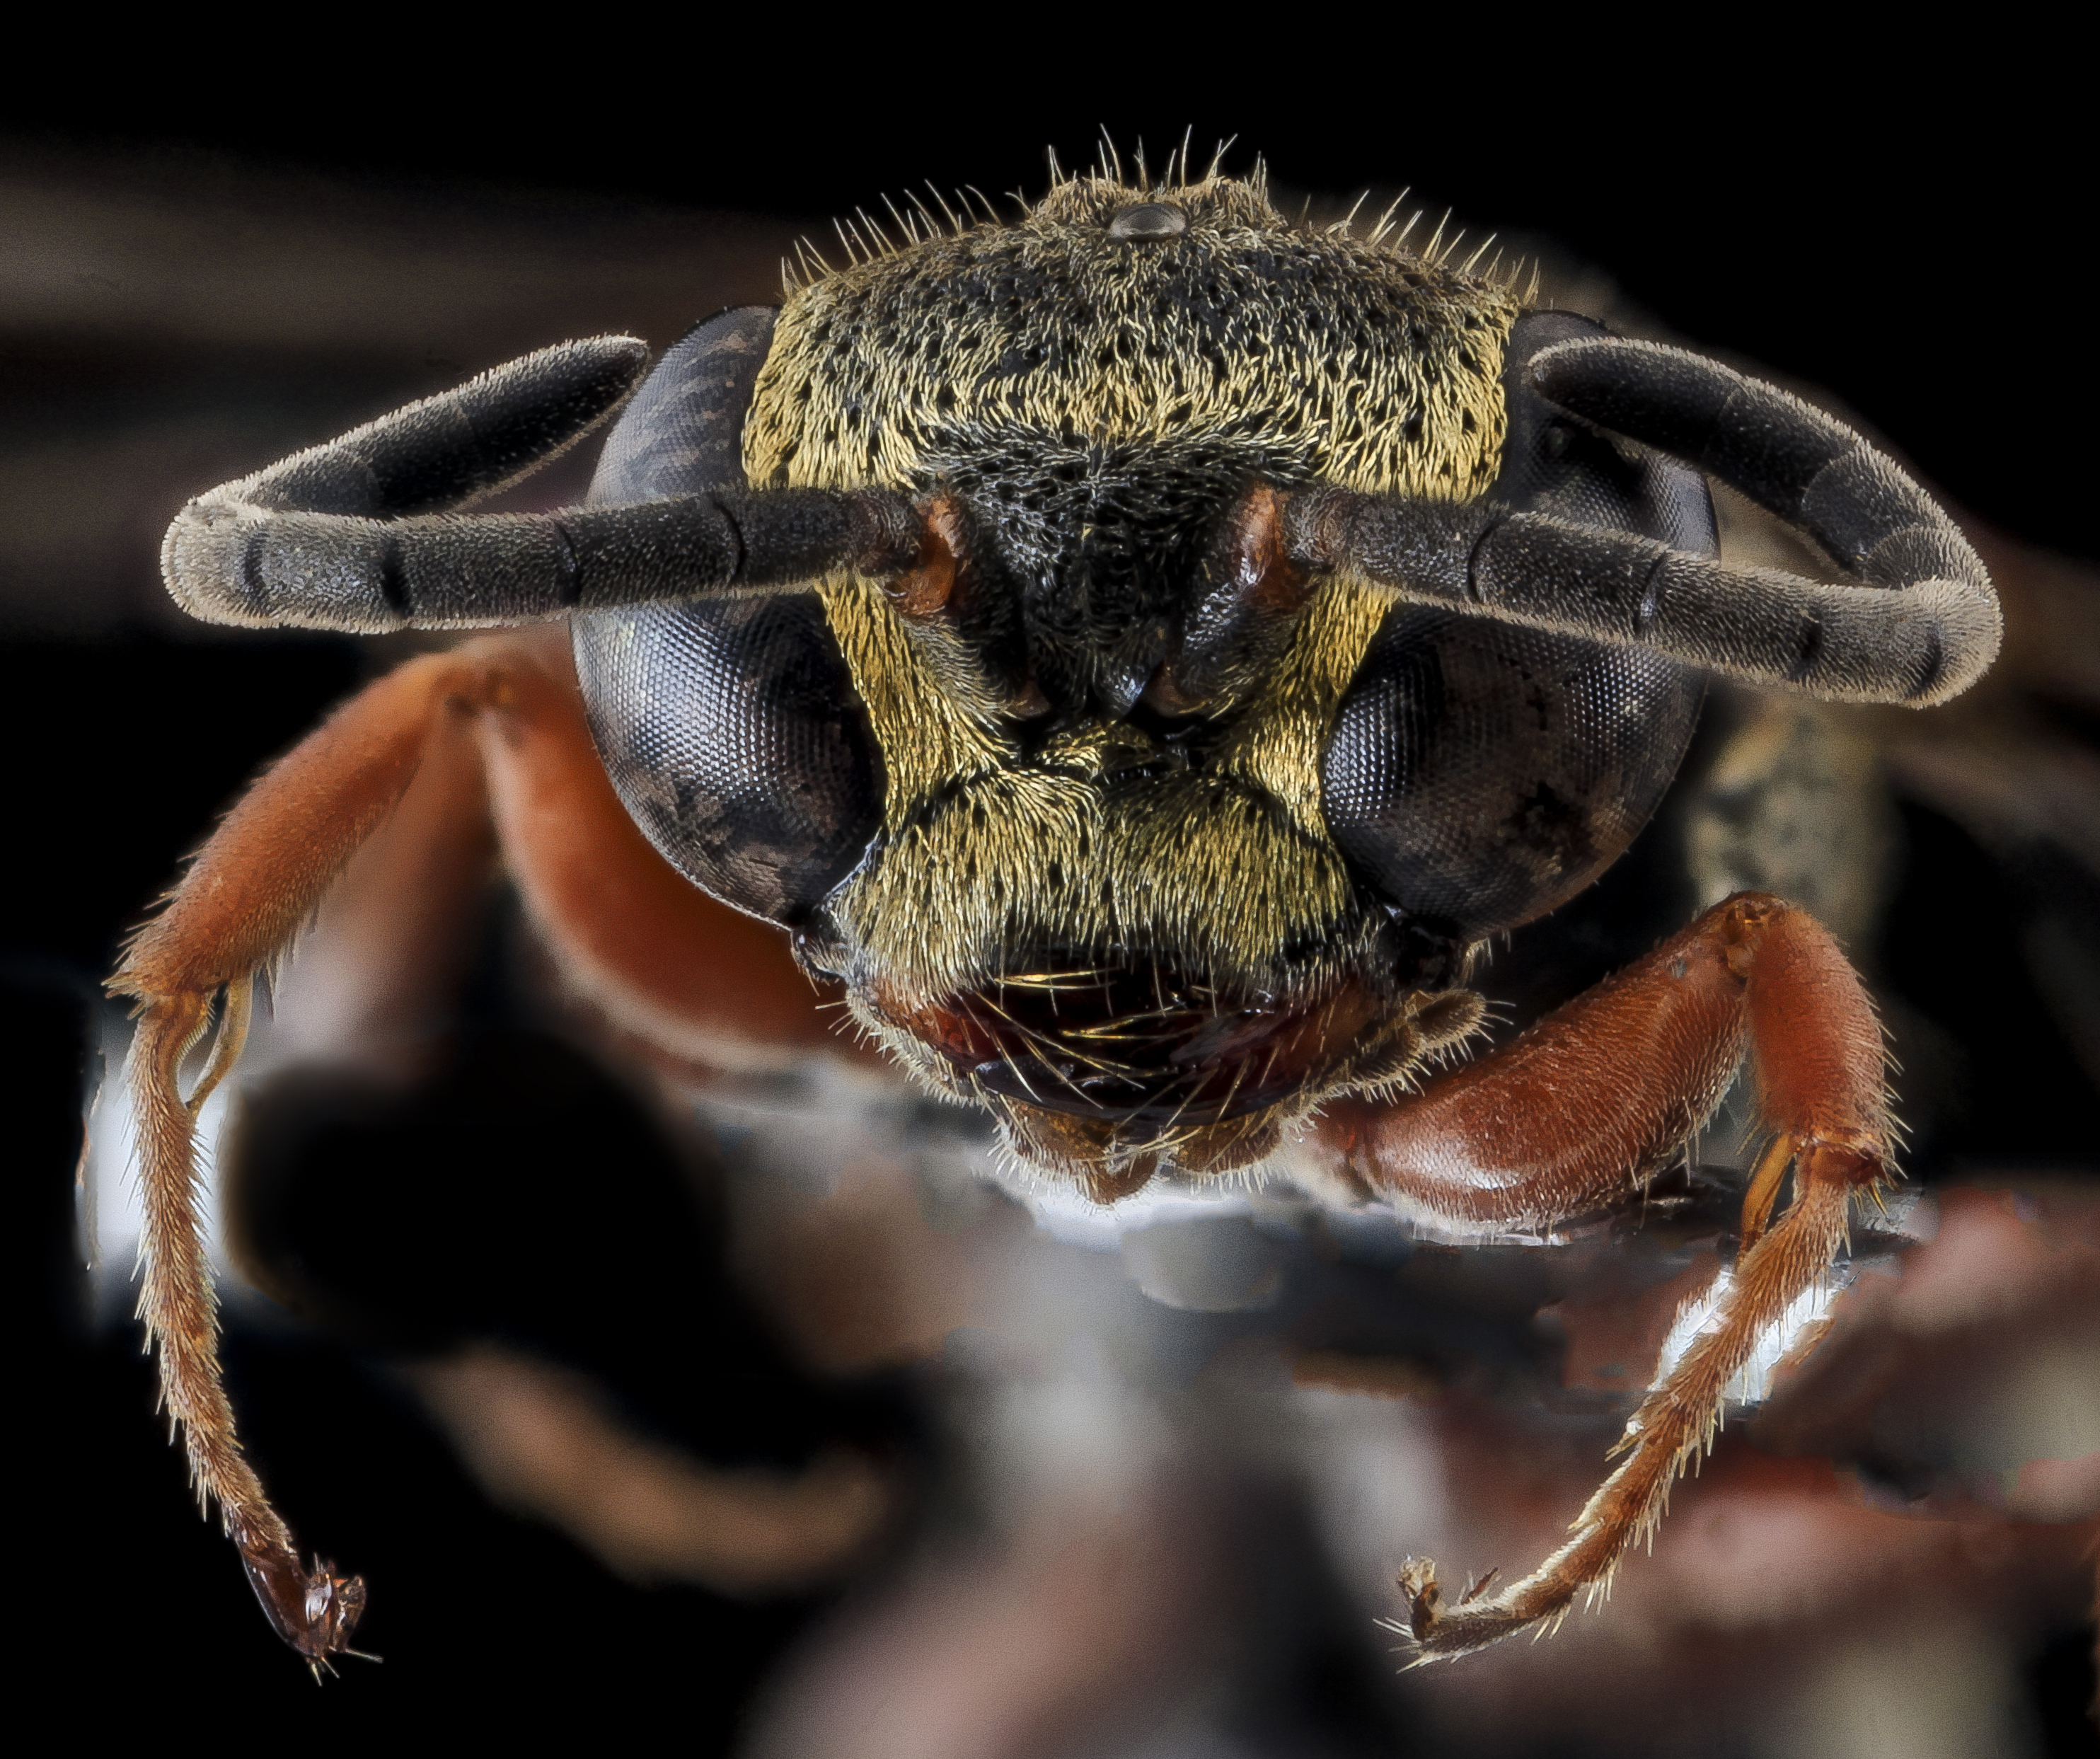 Wasp, F, Face, Cecil County, MD 2013-11-04-11.41.16 ZS PMax (11213129726)